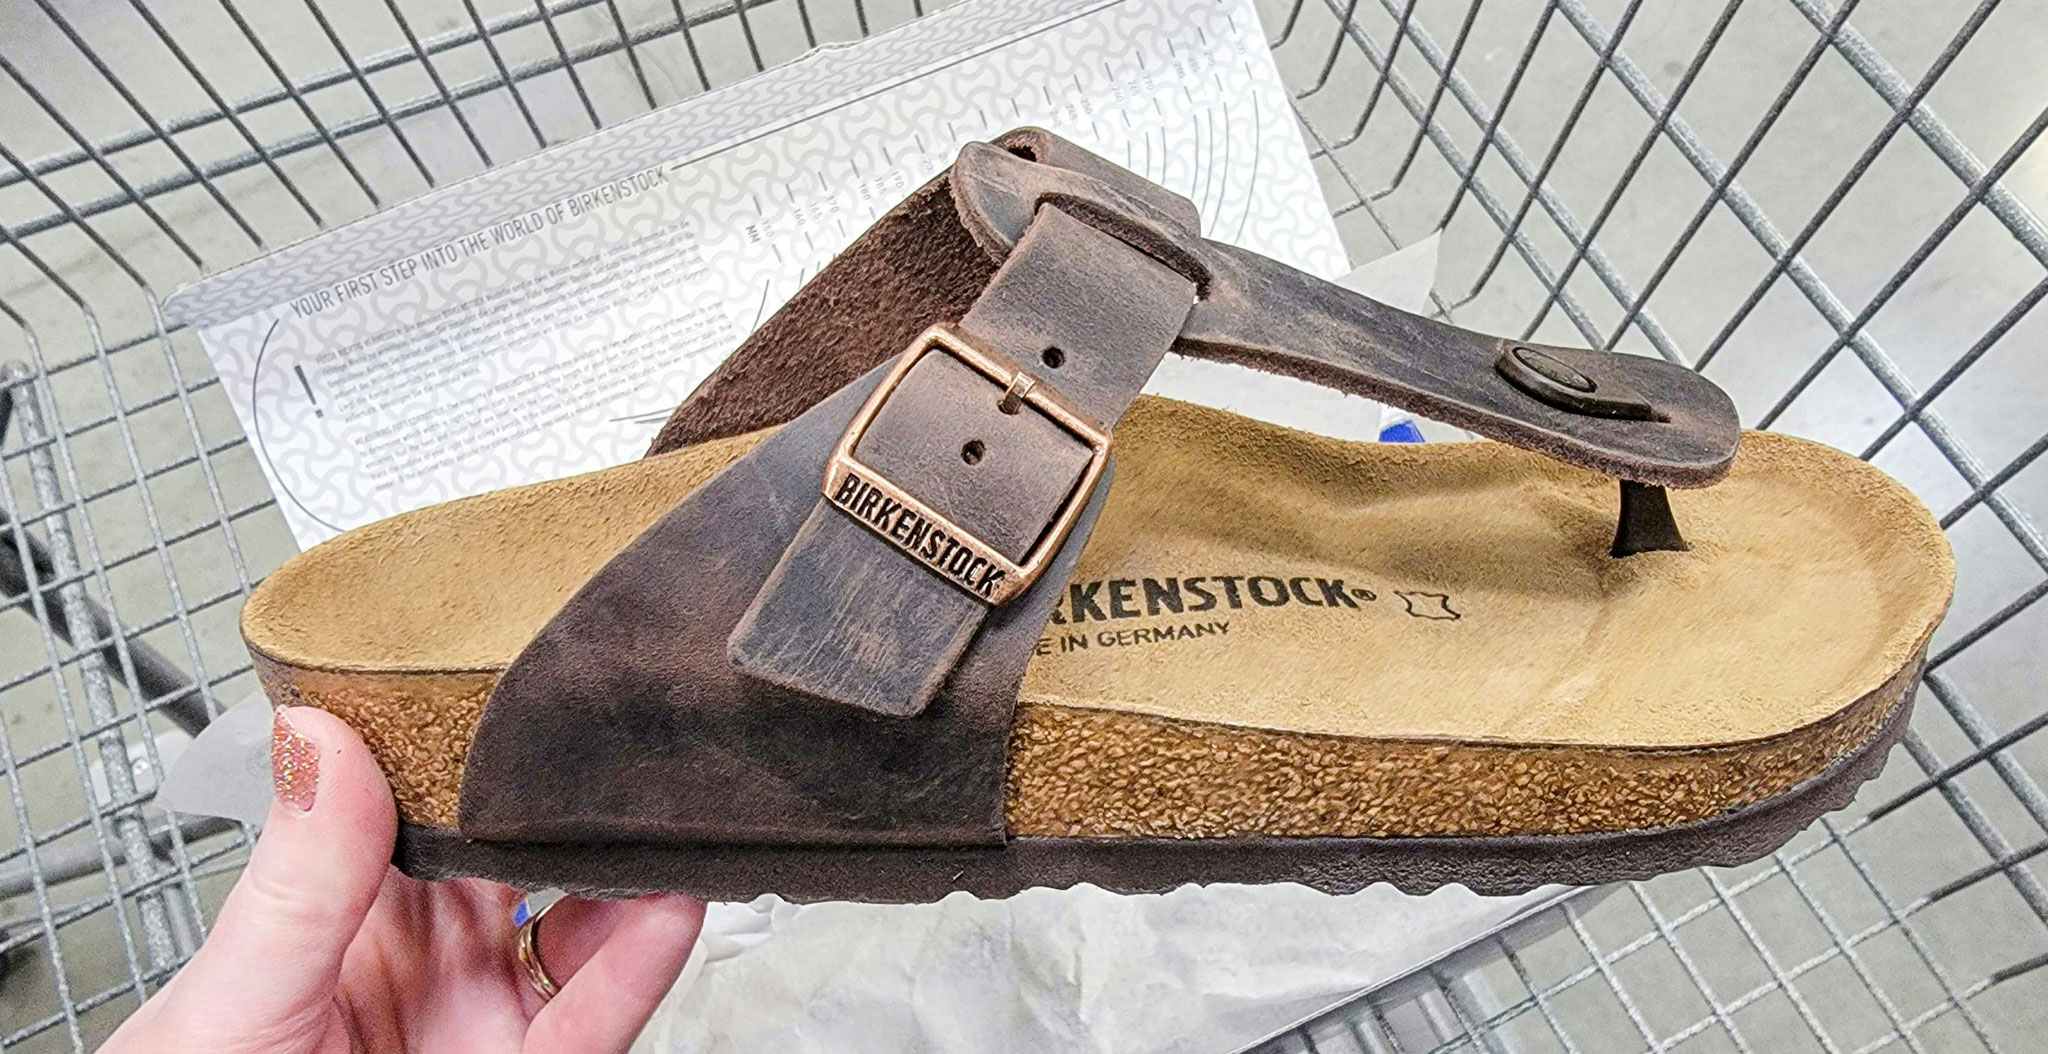 How To Change the Color Of Leather Birkenstocks